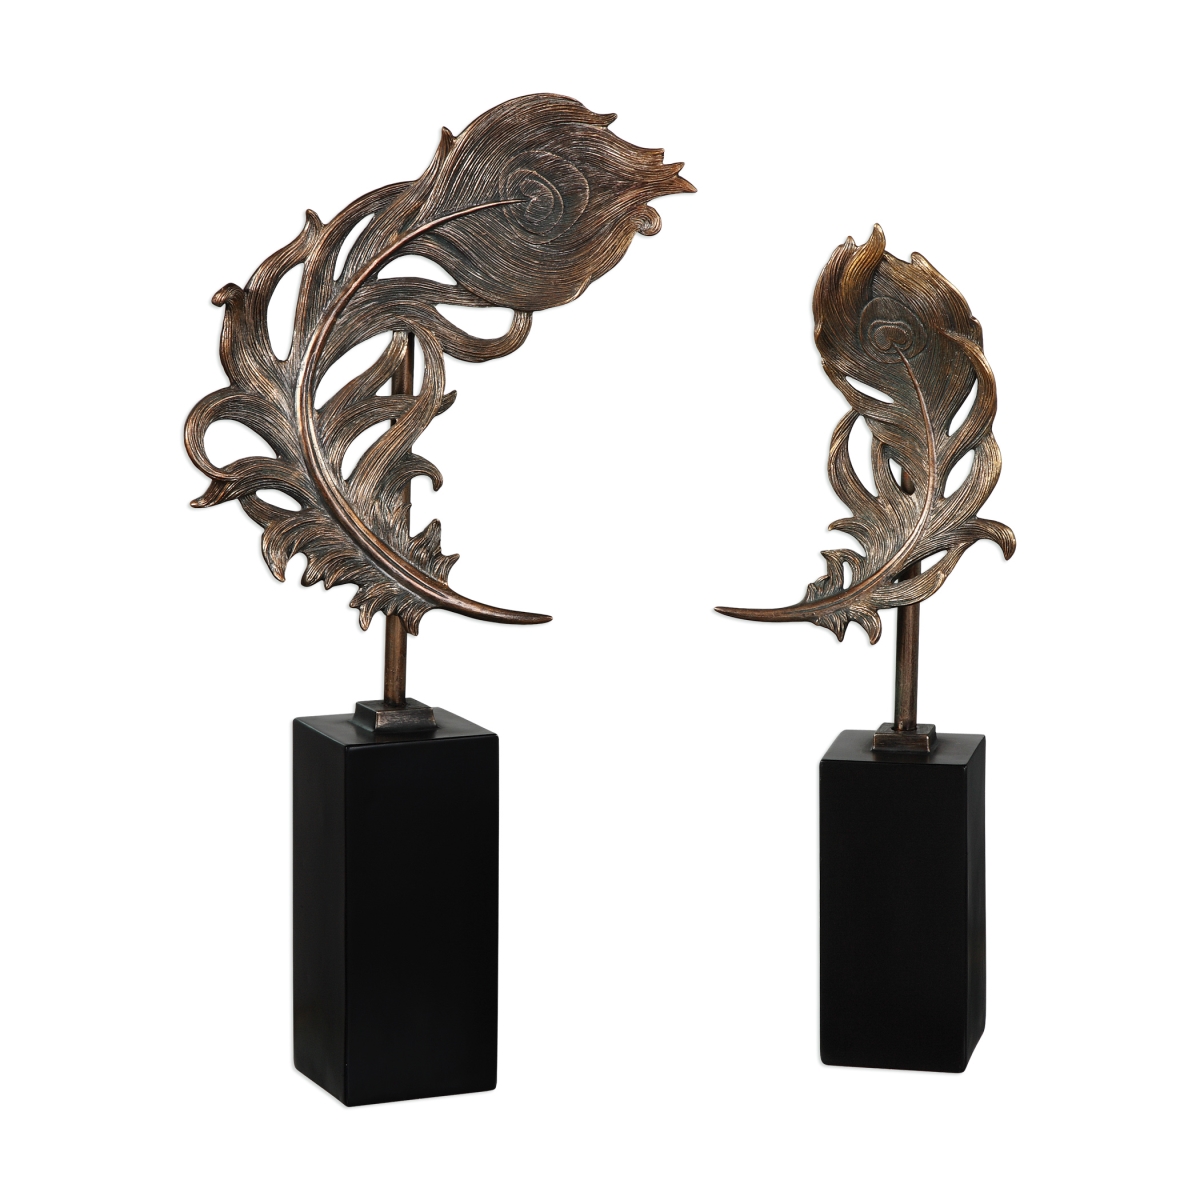 18817 Quill Feathers Sculpture, Set Of 2